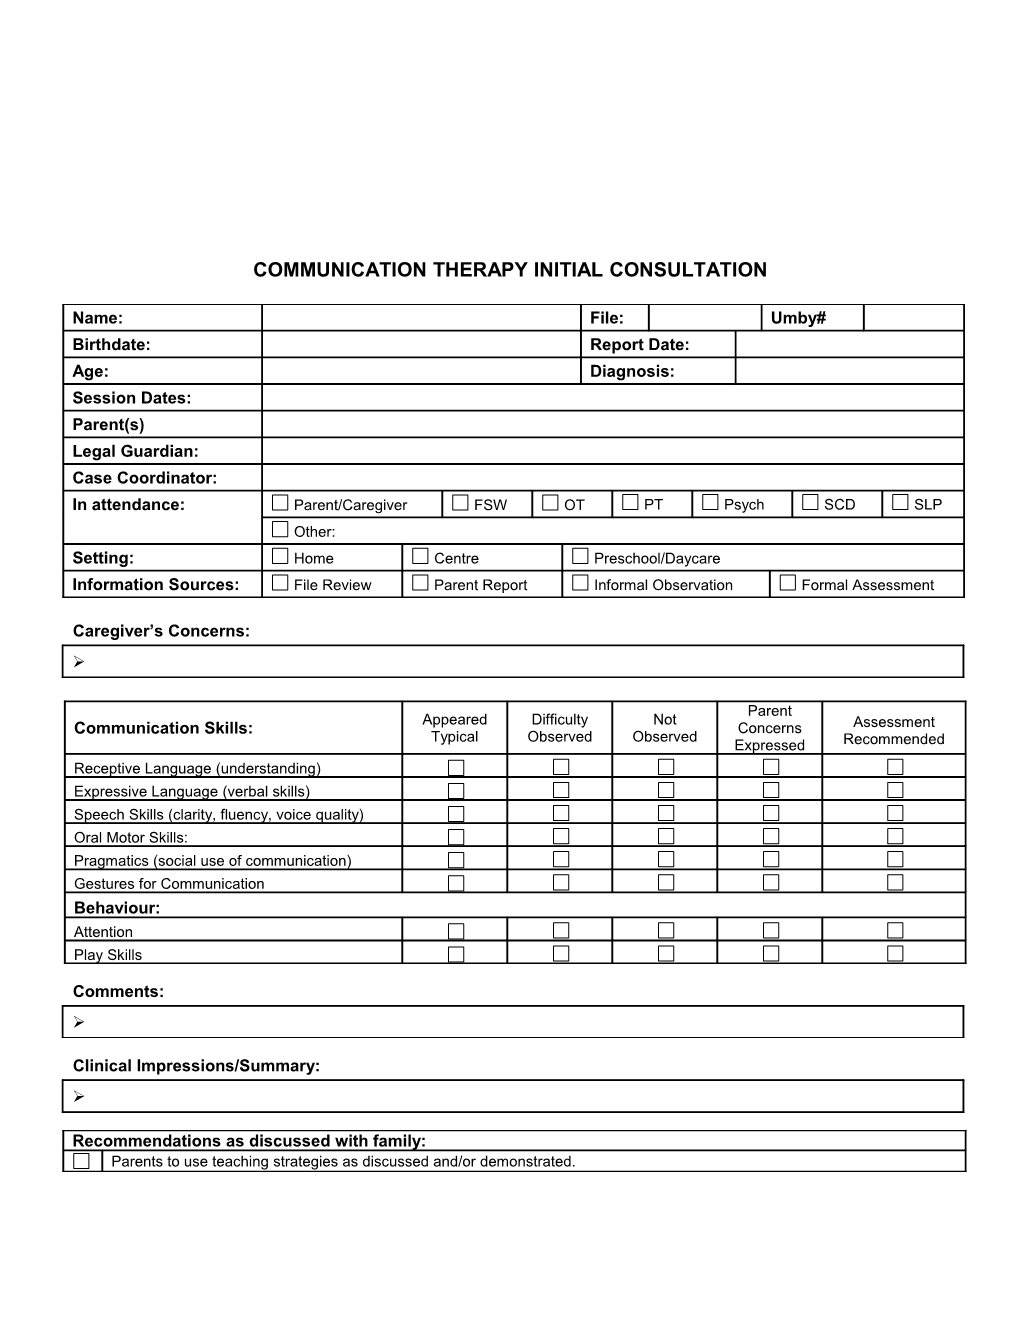 Communication Therapy Initial Consultation